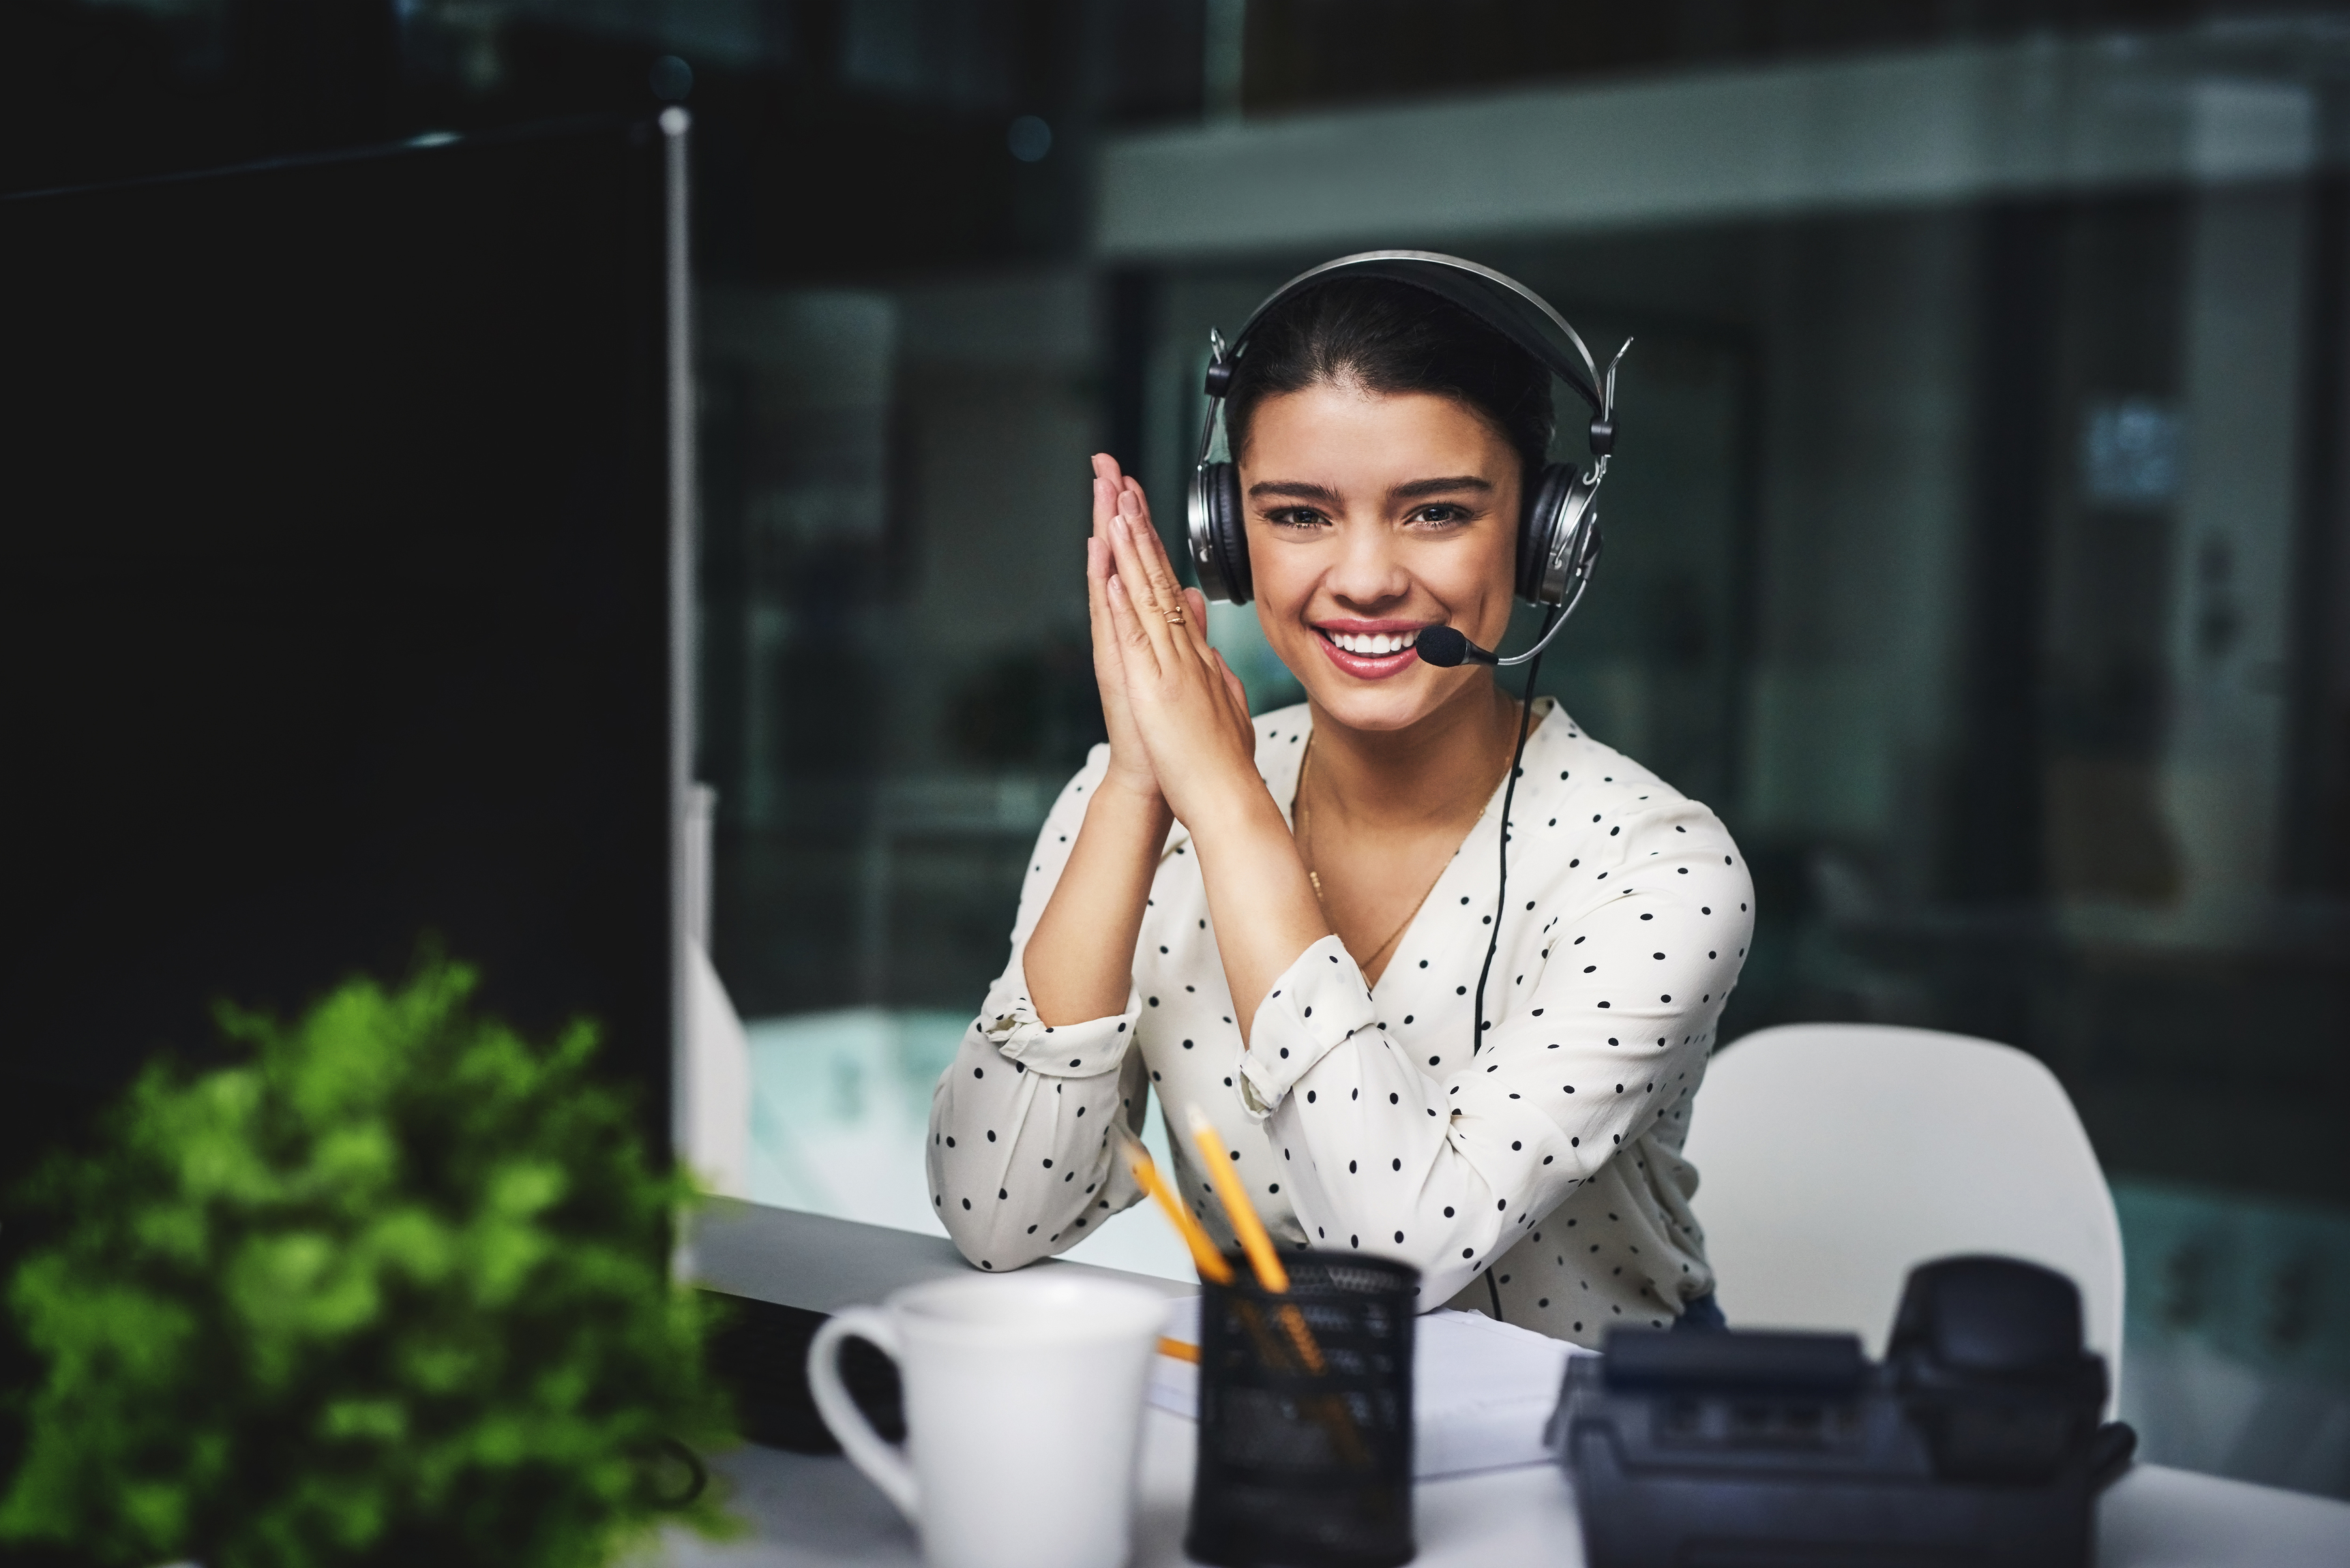 smiling woman with a headset working in an office